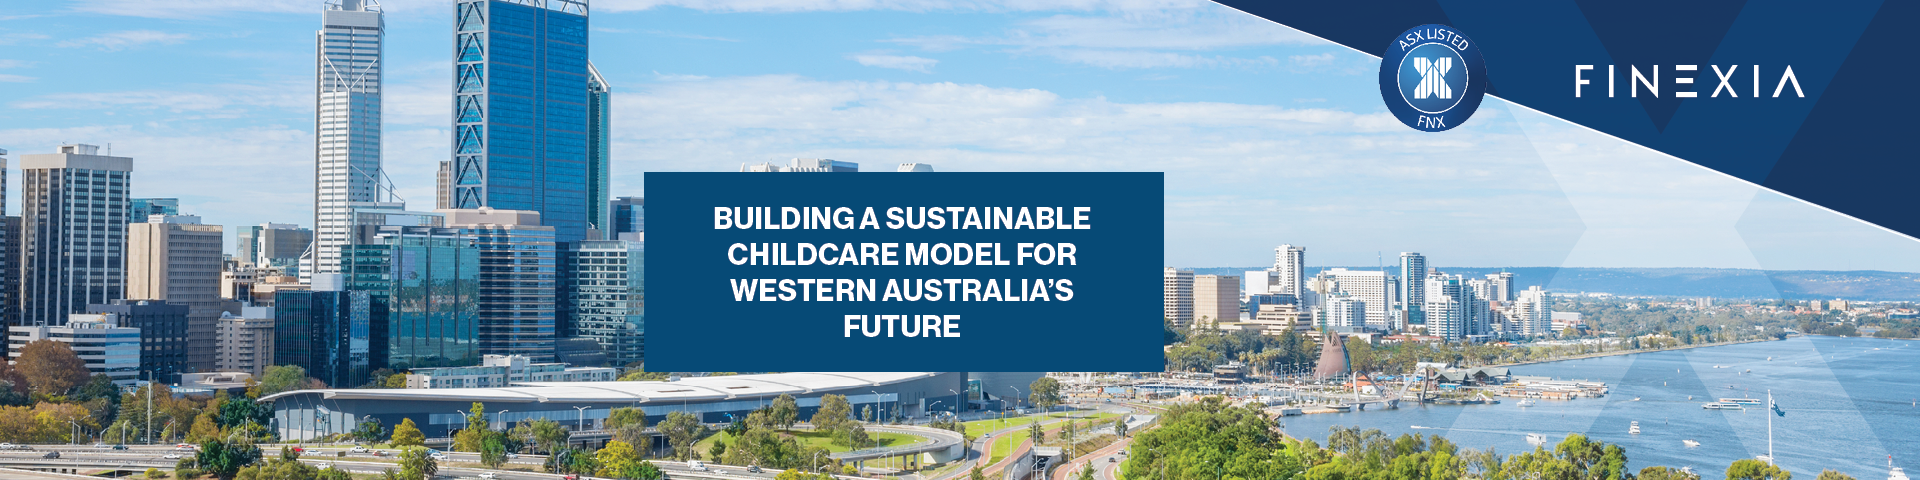 Building a Sustainable Childcare Model for Western Australia’s Future